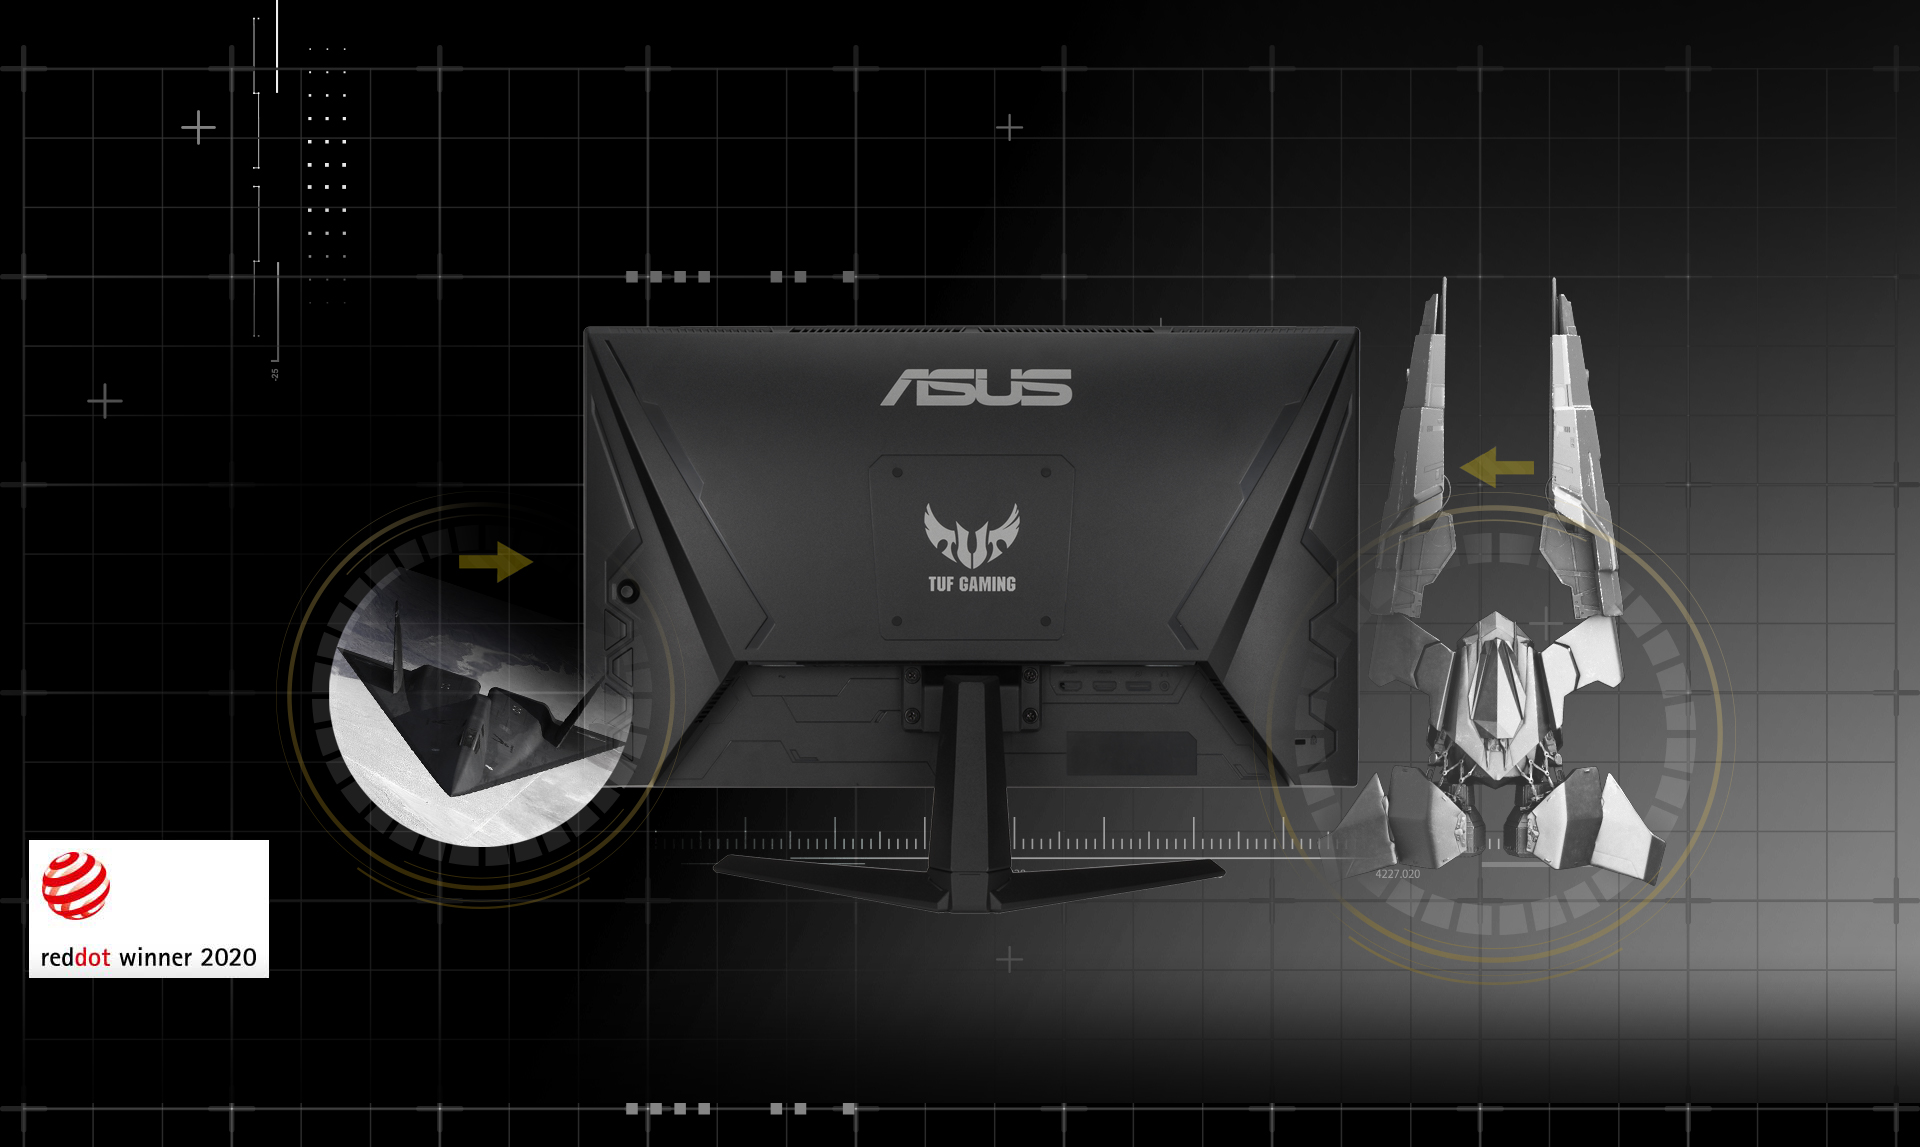 TUF Gaming 1A series monitor with stealth fighter inspired design, with 2020 Reddot winner logo